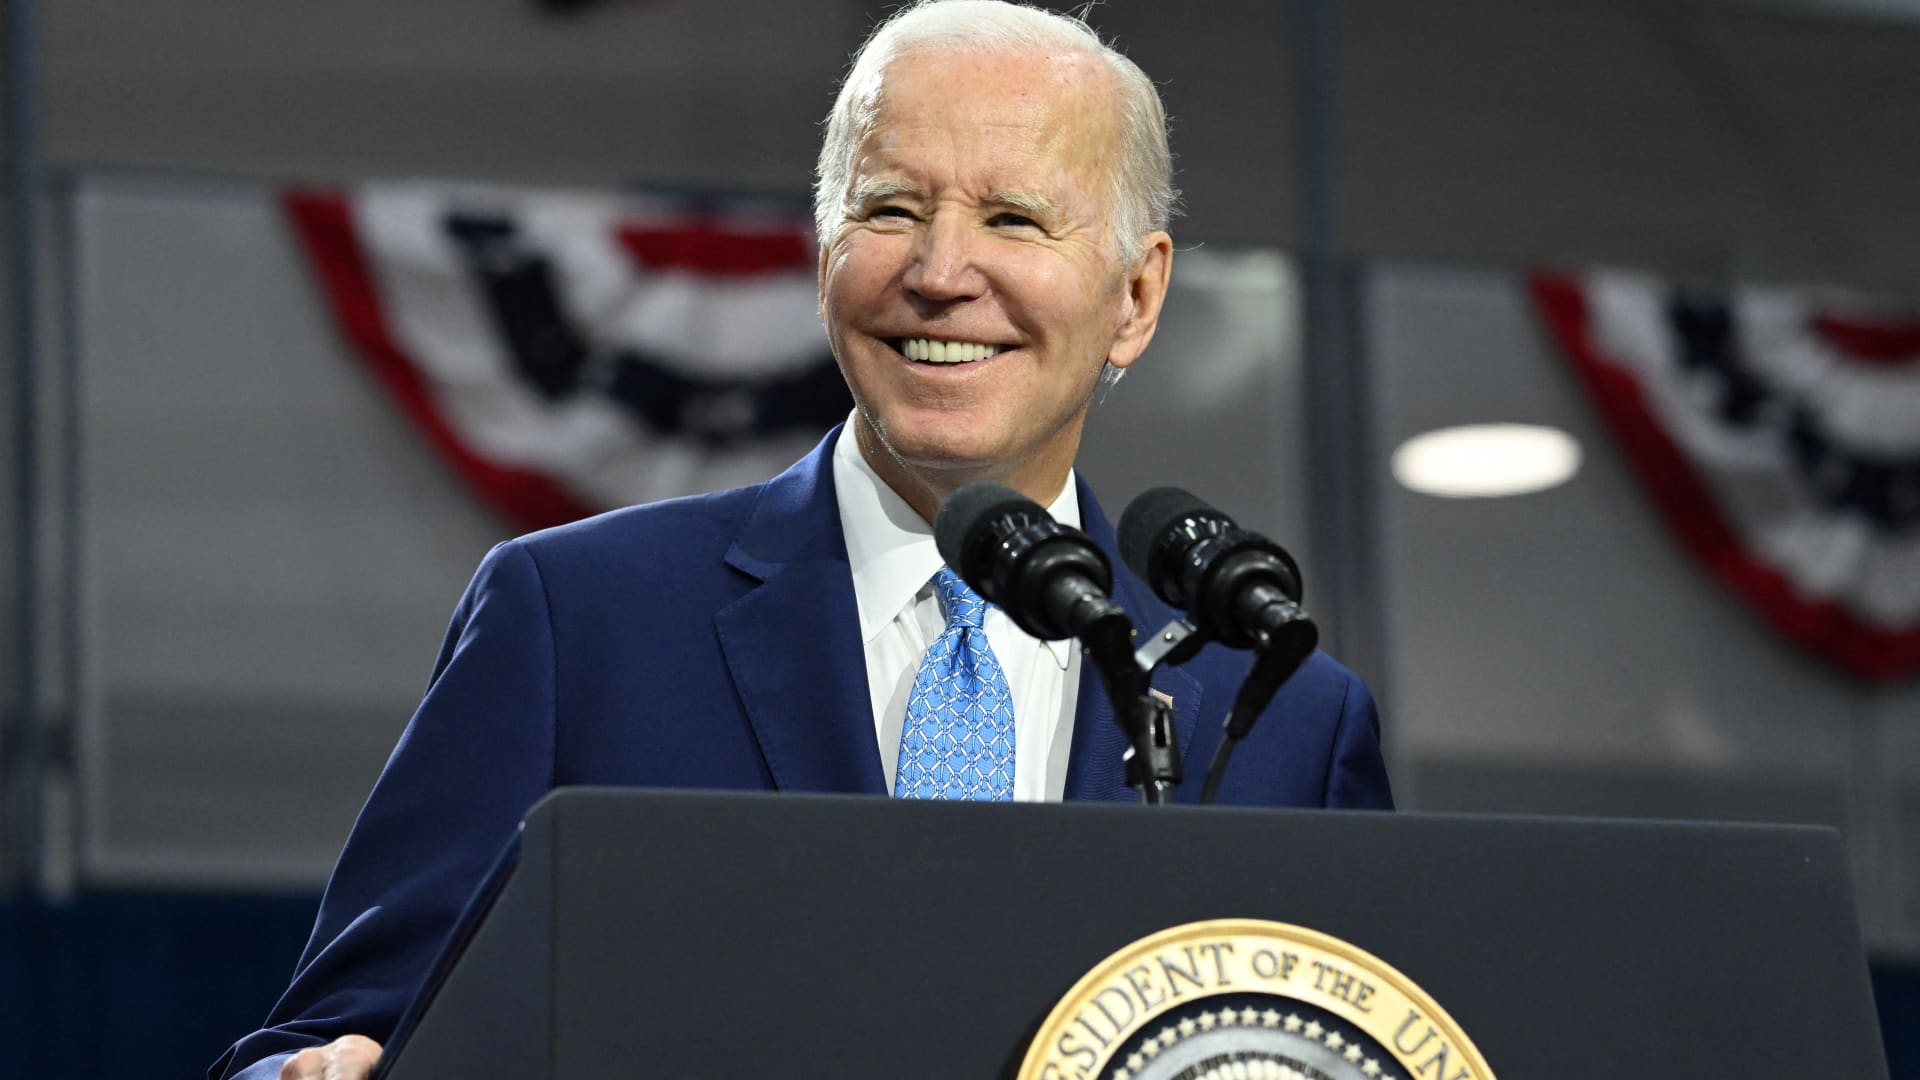 Biden calls for tax on the wealthy to extend Medicare funding